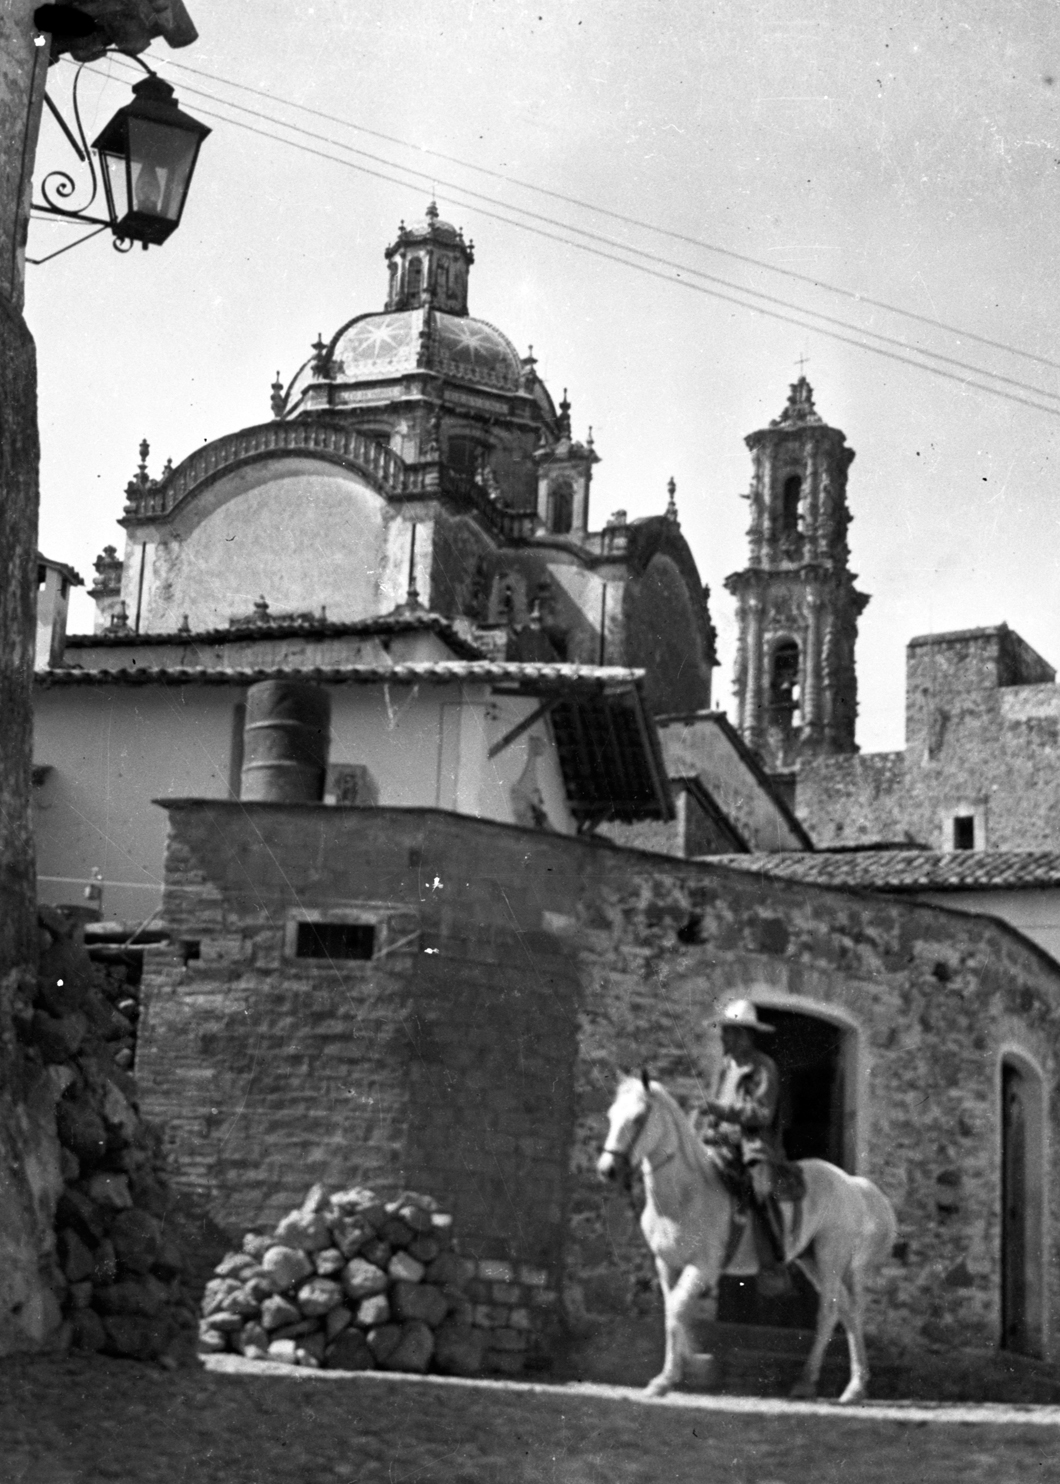 1940s man on horse in front of old church